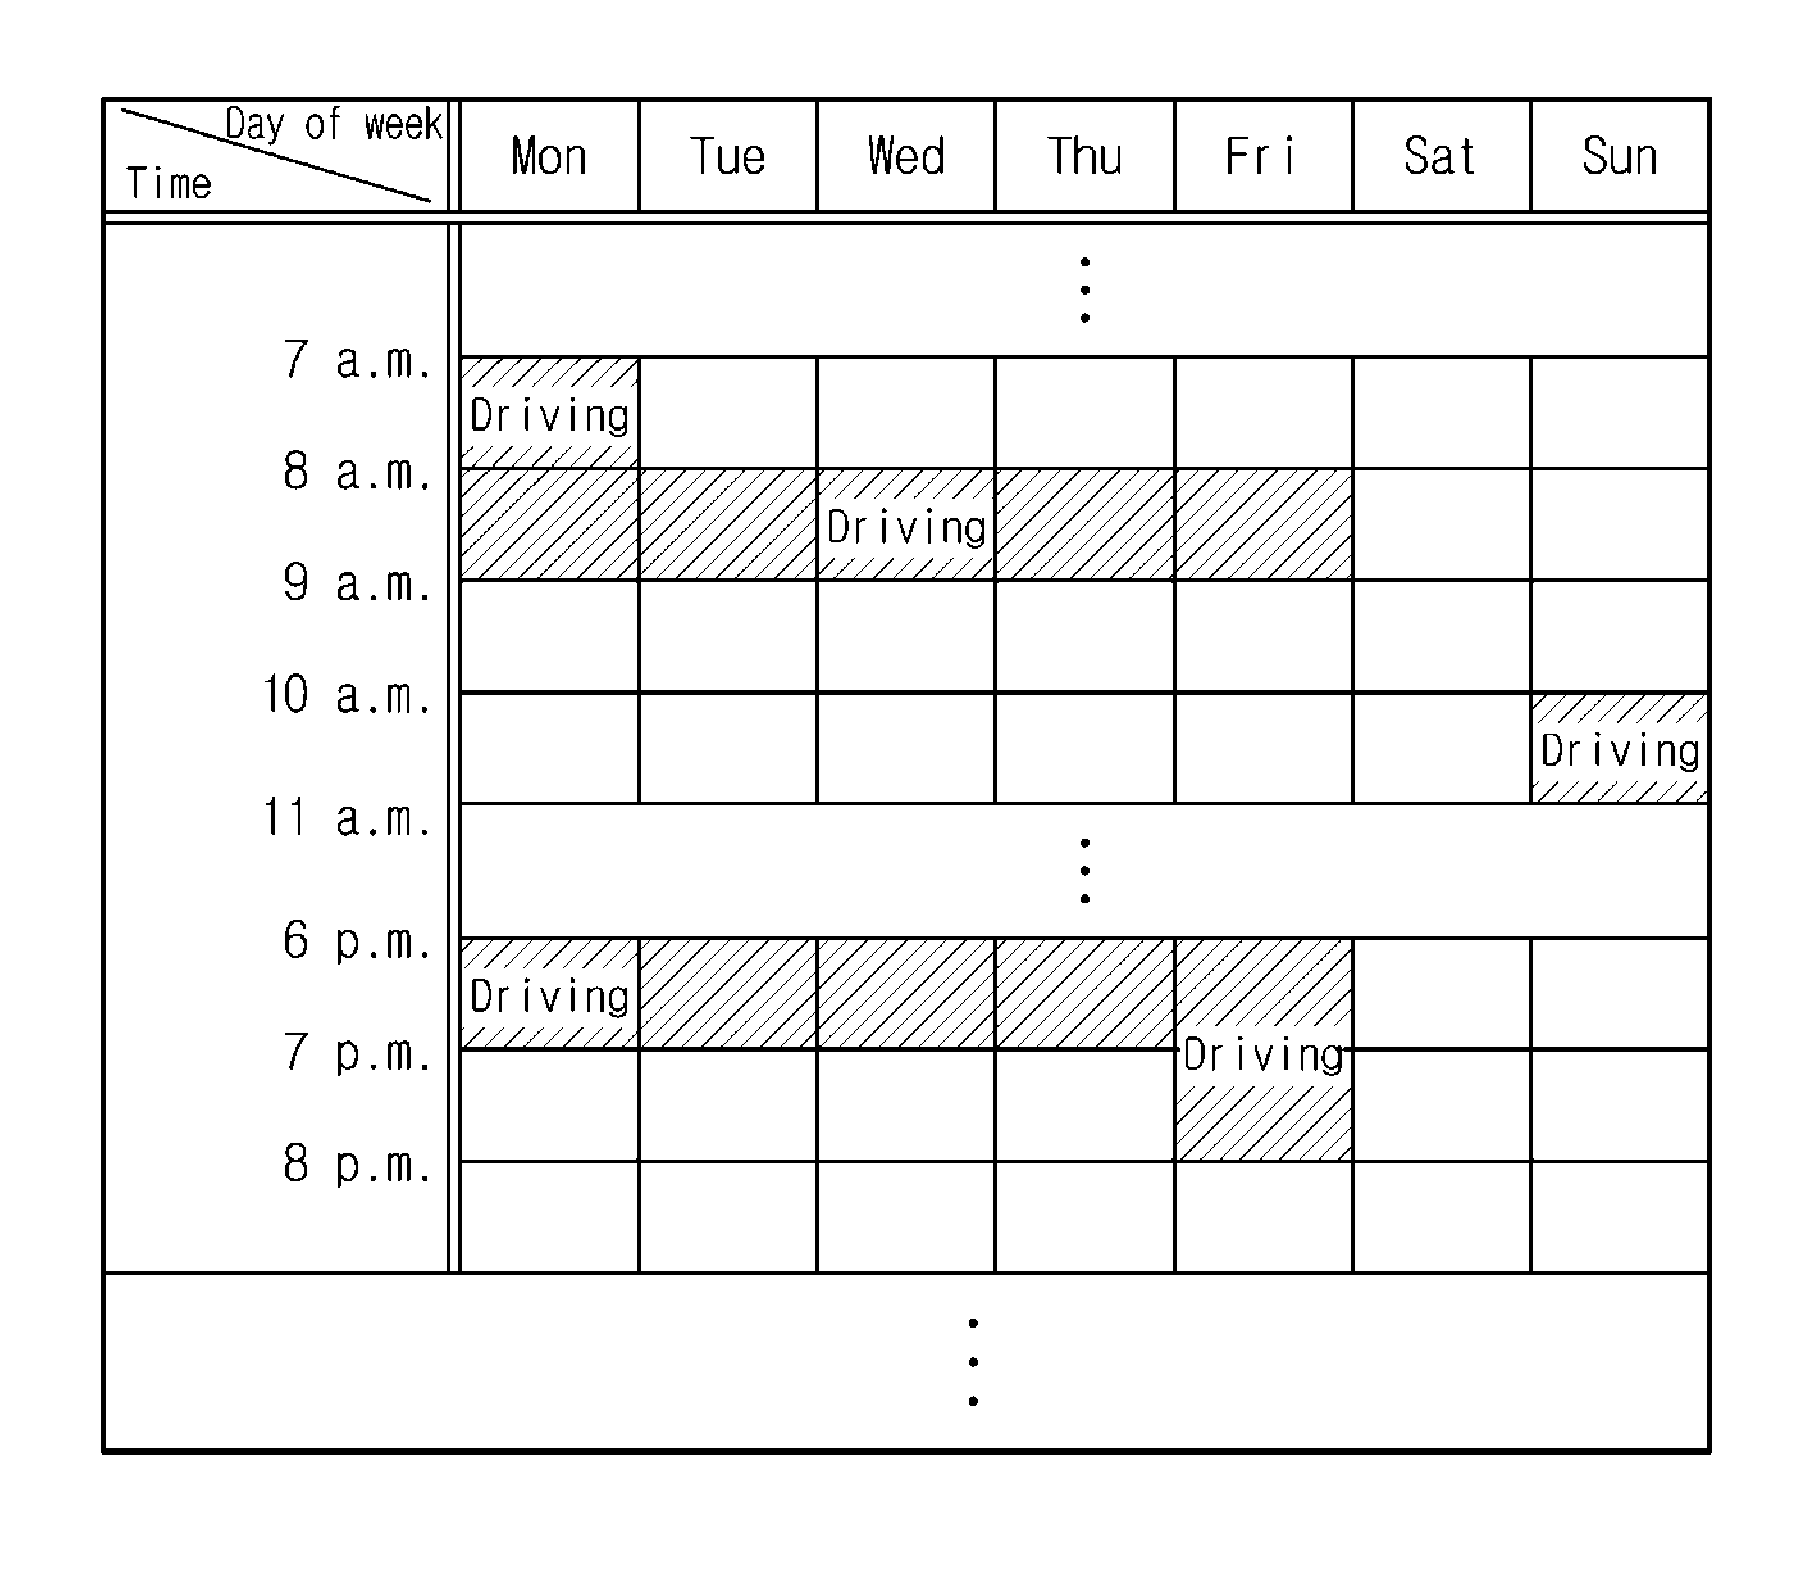 Apparatus and method for a telematics service